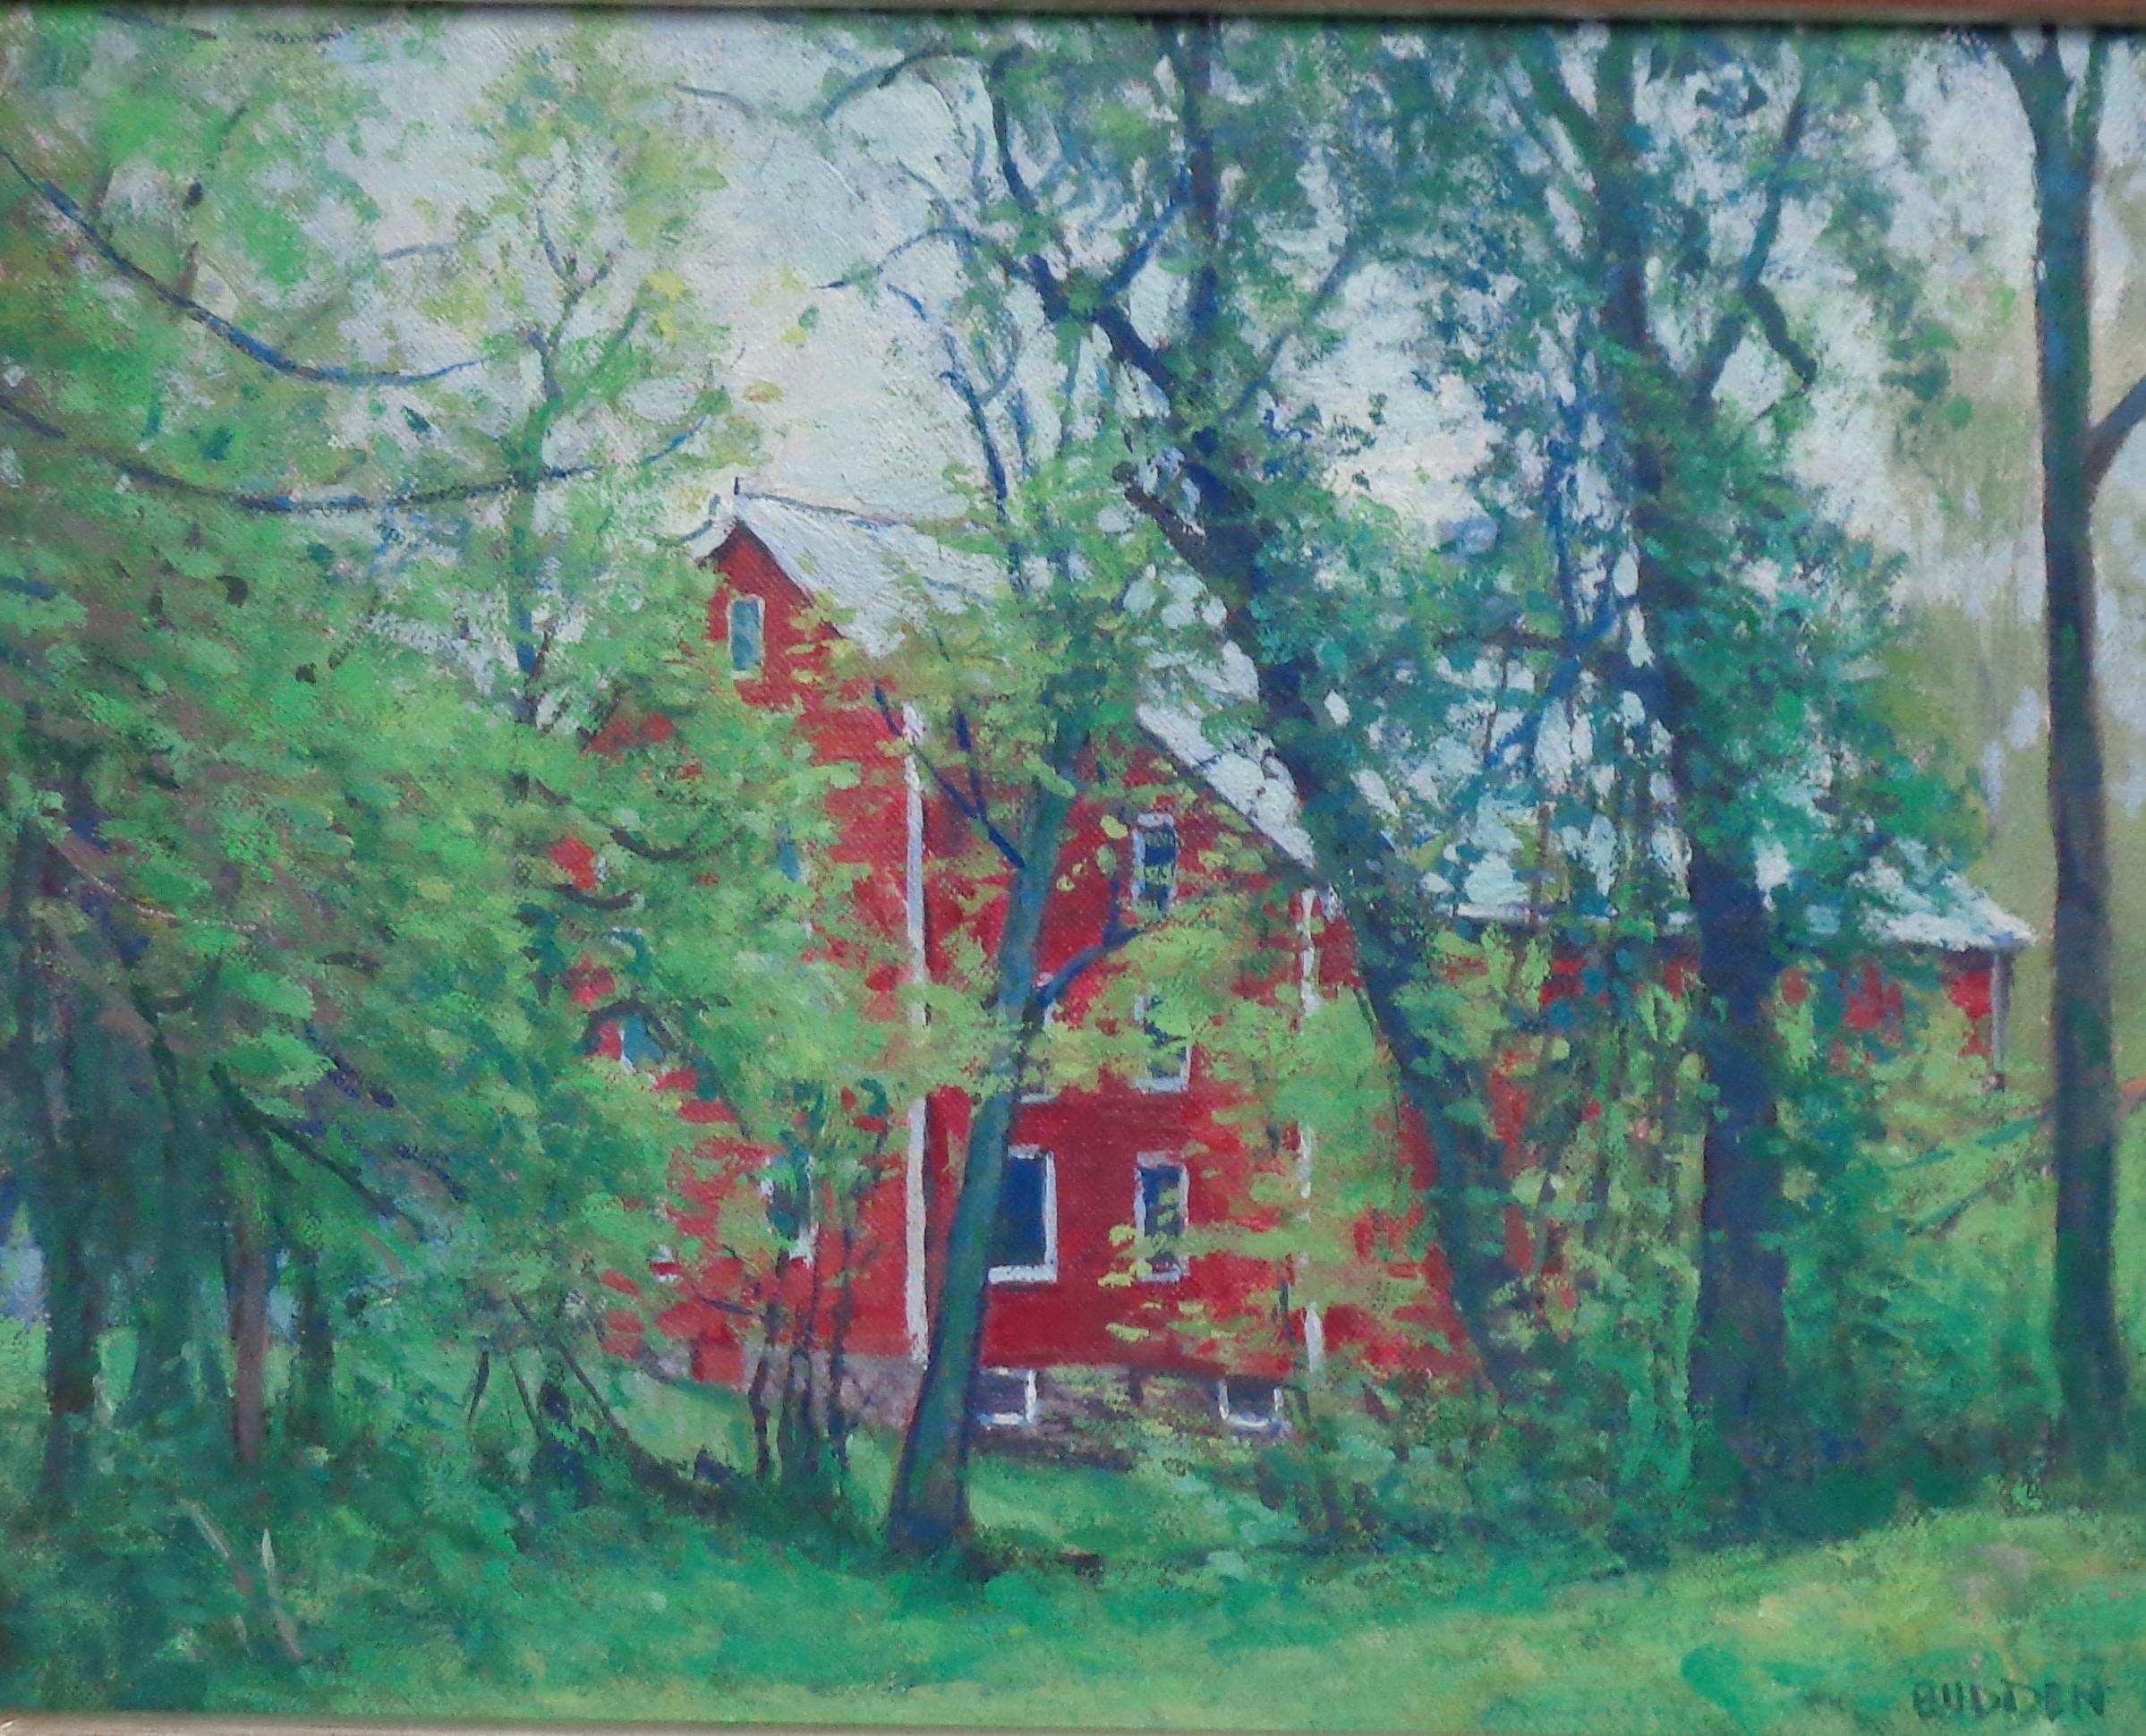 Colors Of Spring
Oil/Panel
11 x 14 image unframed
Colors Of Spring is a plein air painting of Kirby's Mill done on location near my studio. I was intrigued by the complementary colors of red and green and depicting the Mill thru the trees. The image